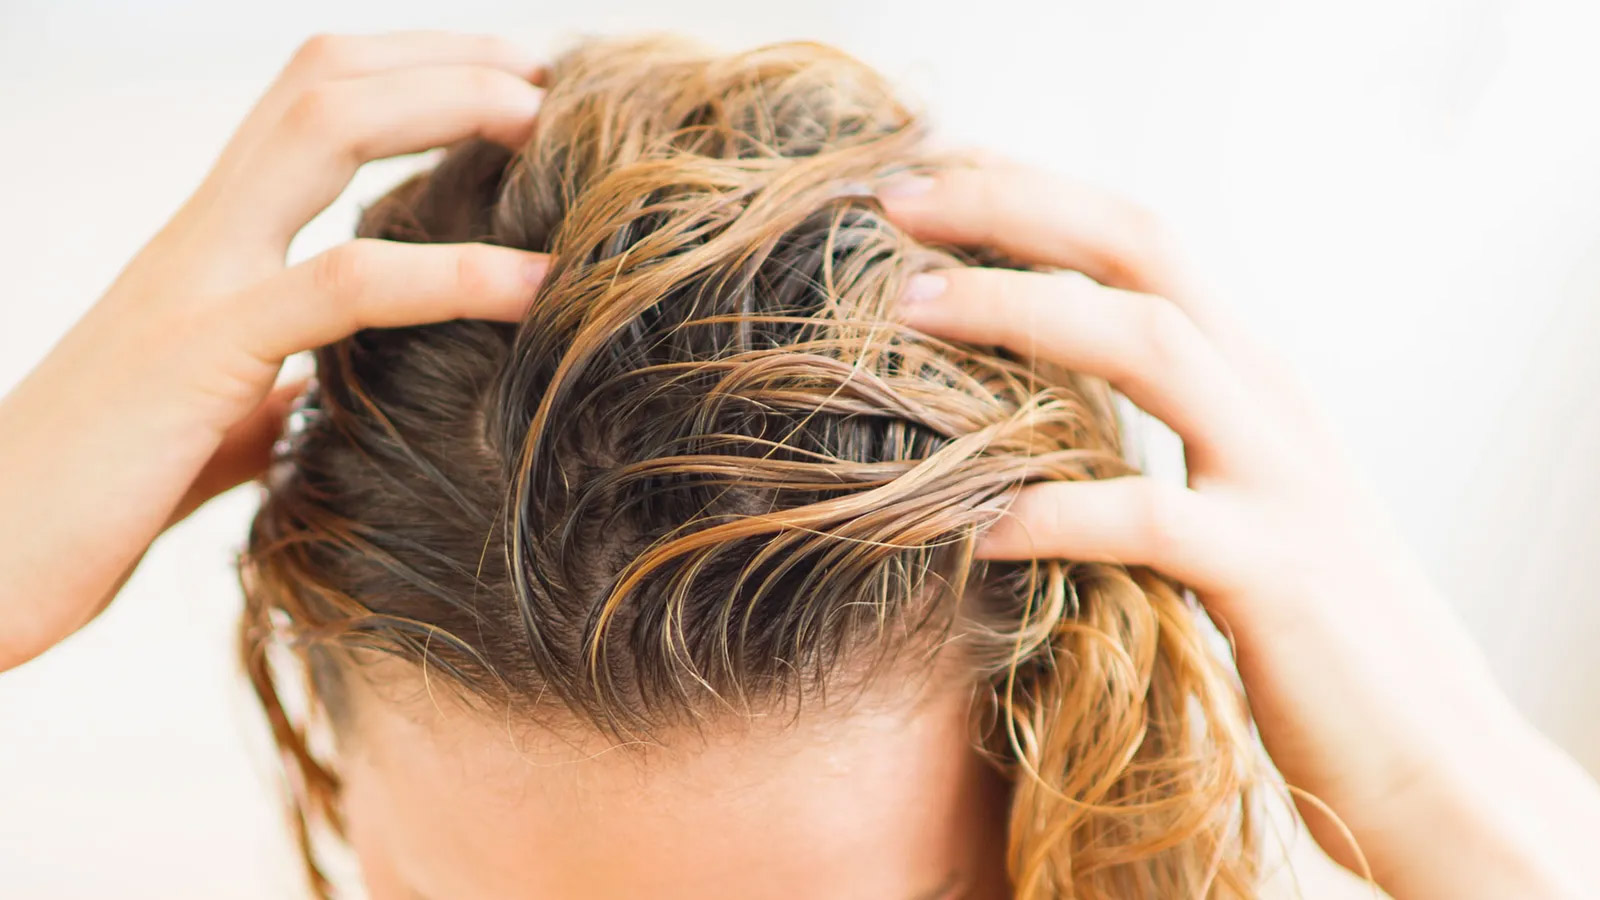 Why it is worth scrubbing the hair